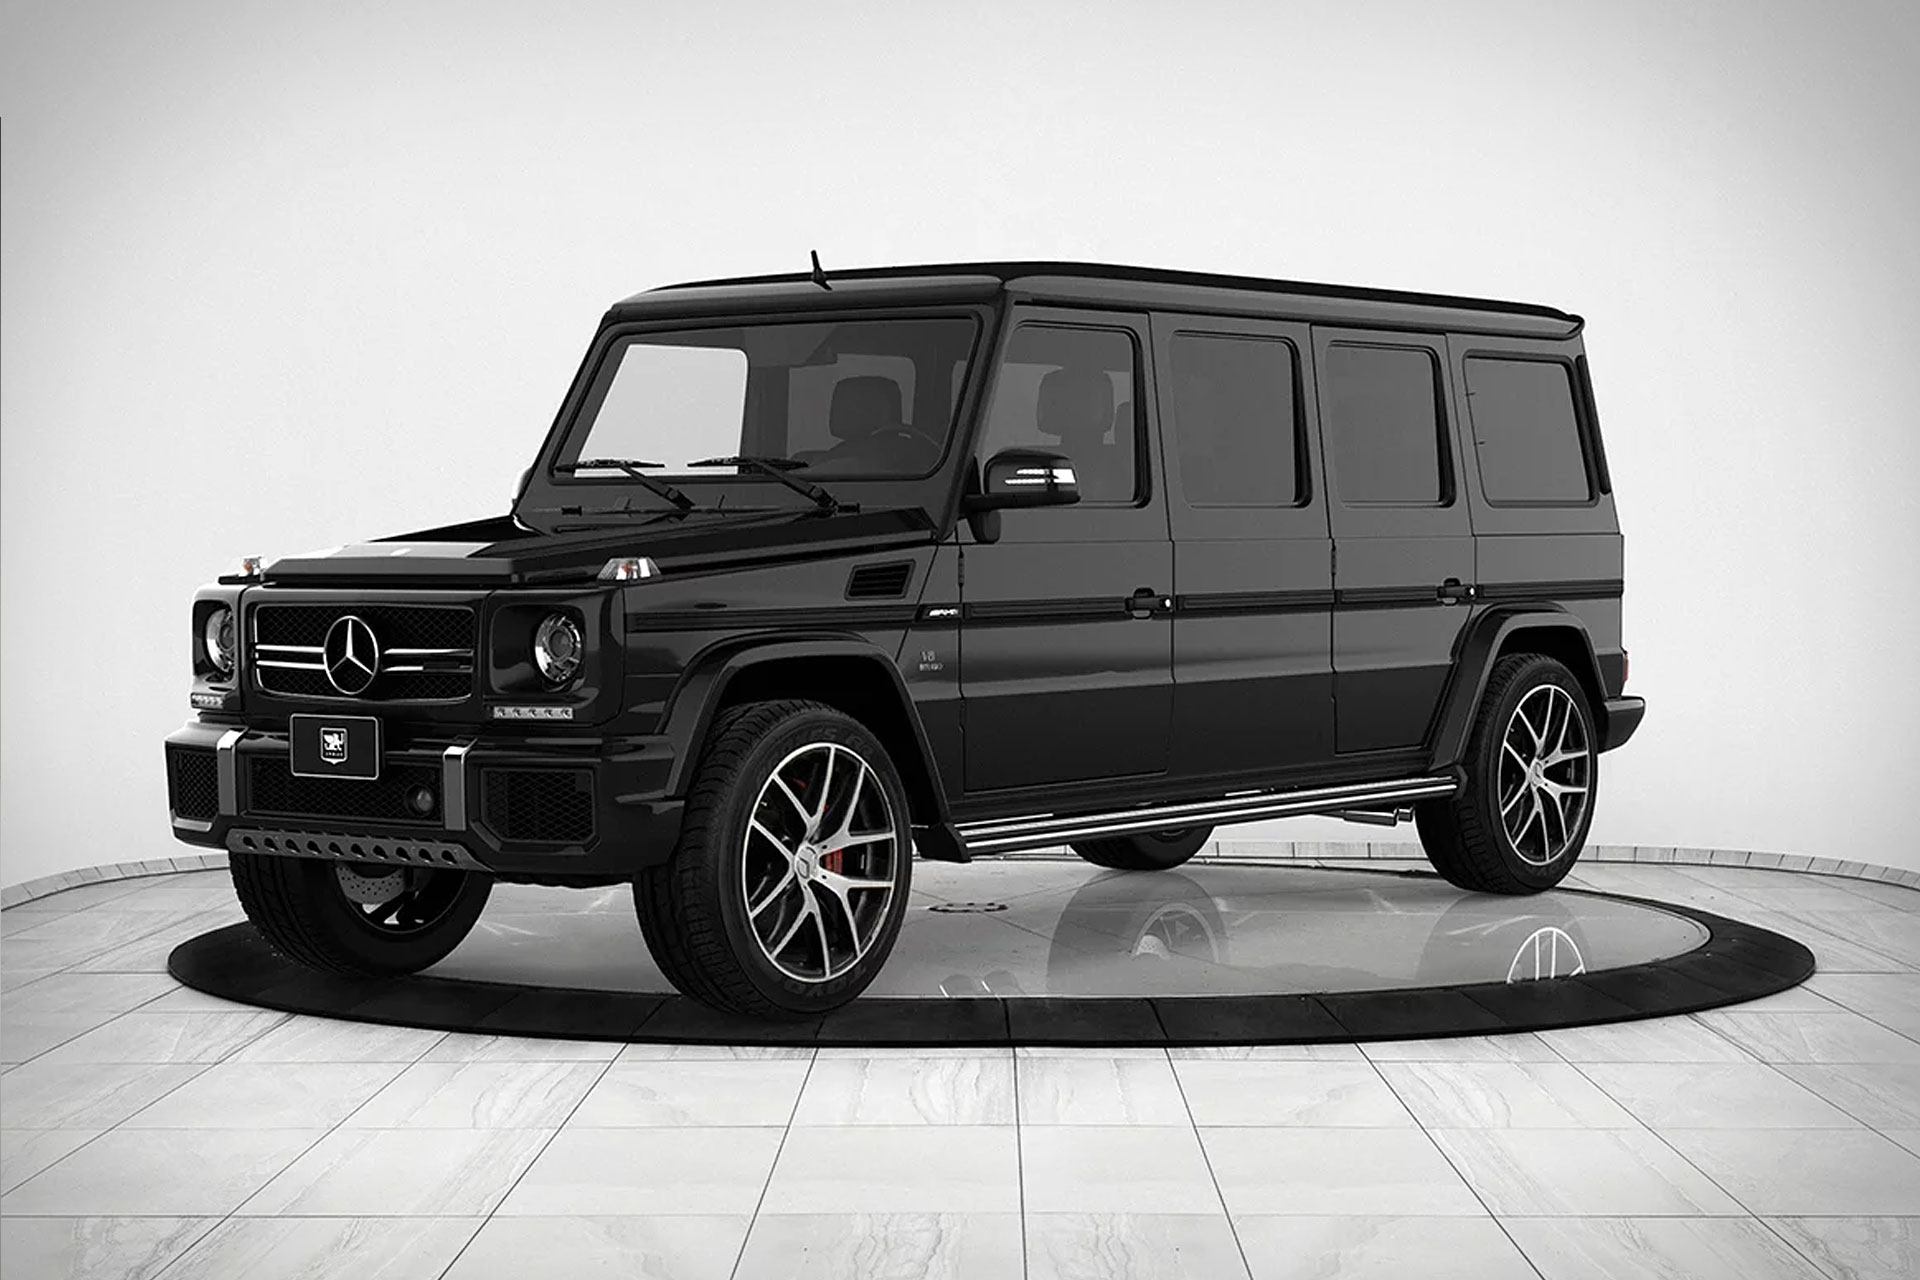 Inkas Armored Mercedes G63 Limousine | Uncrate - 